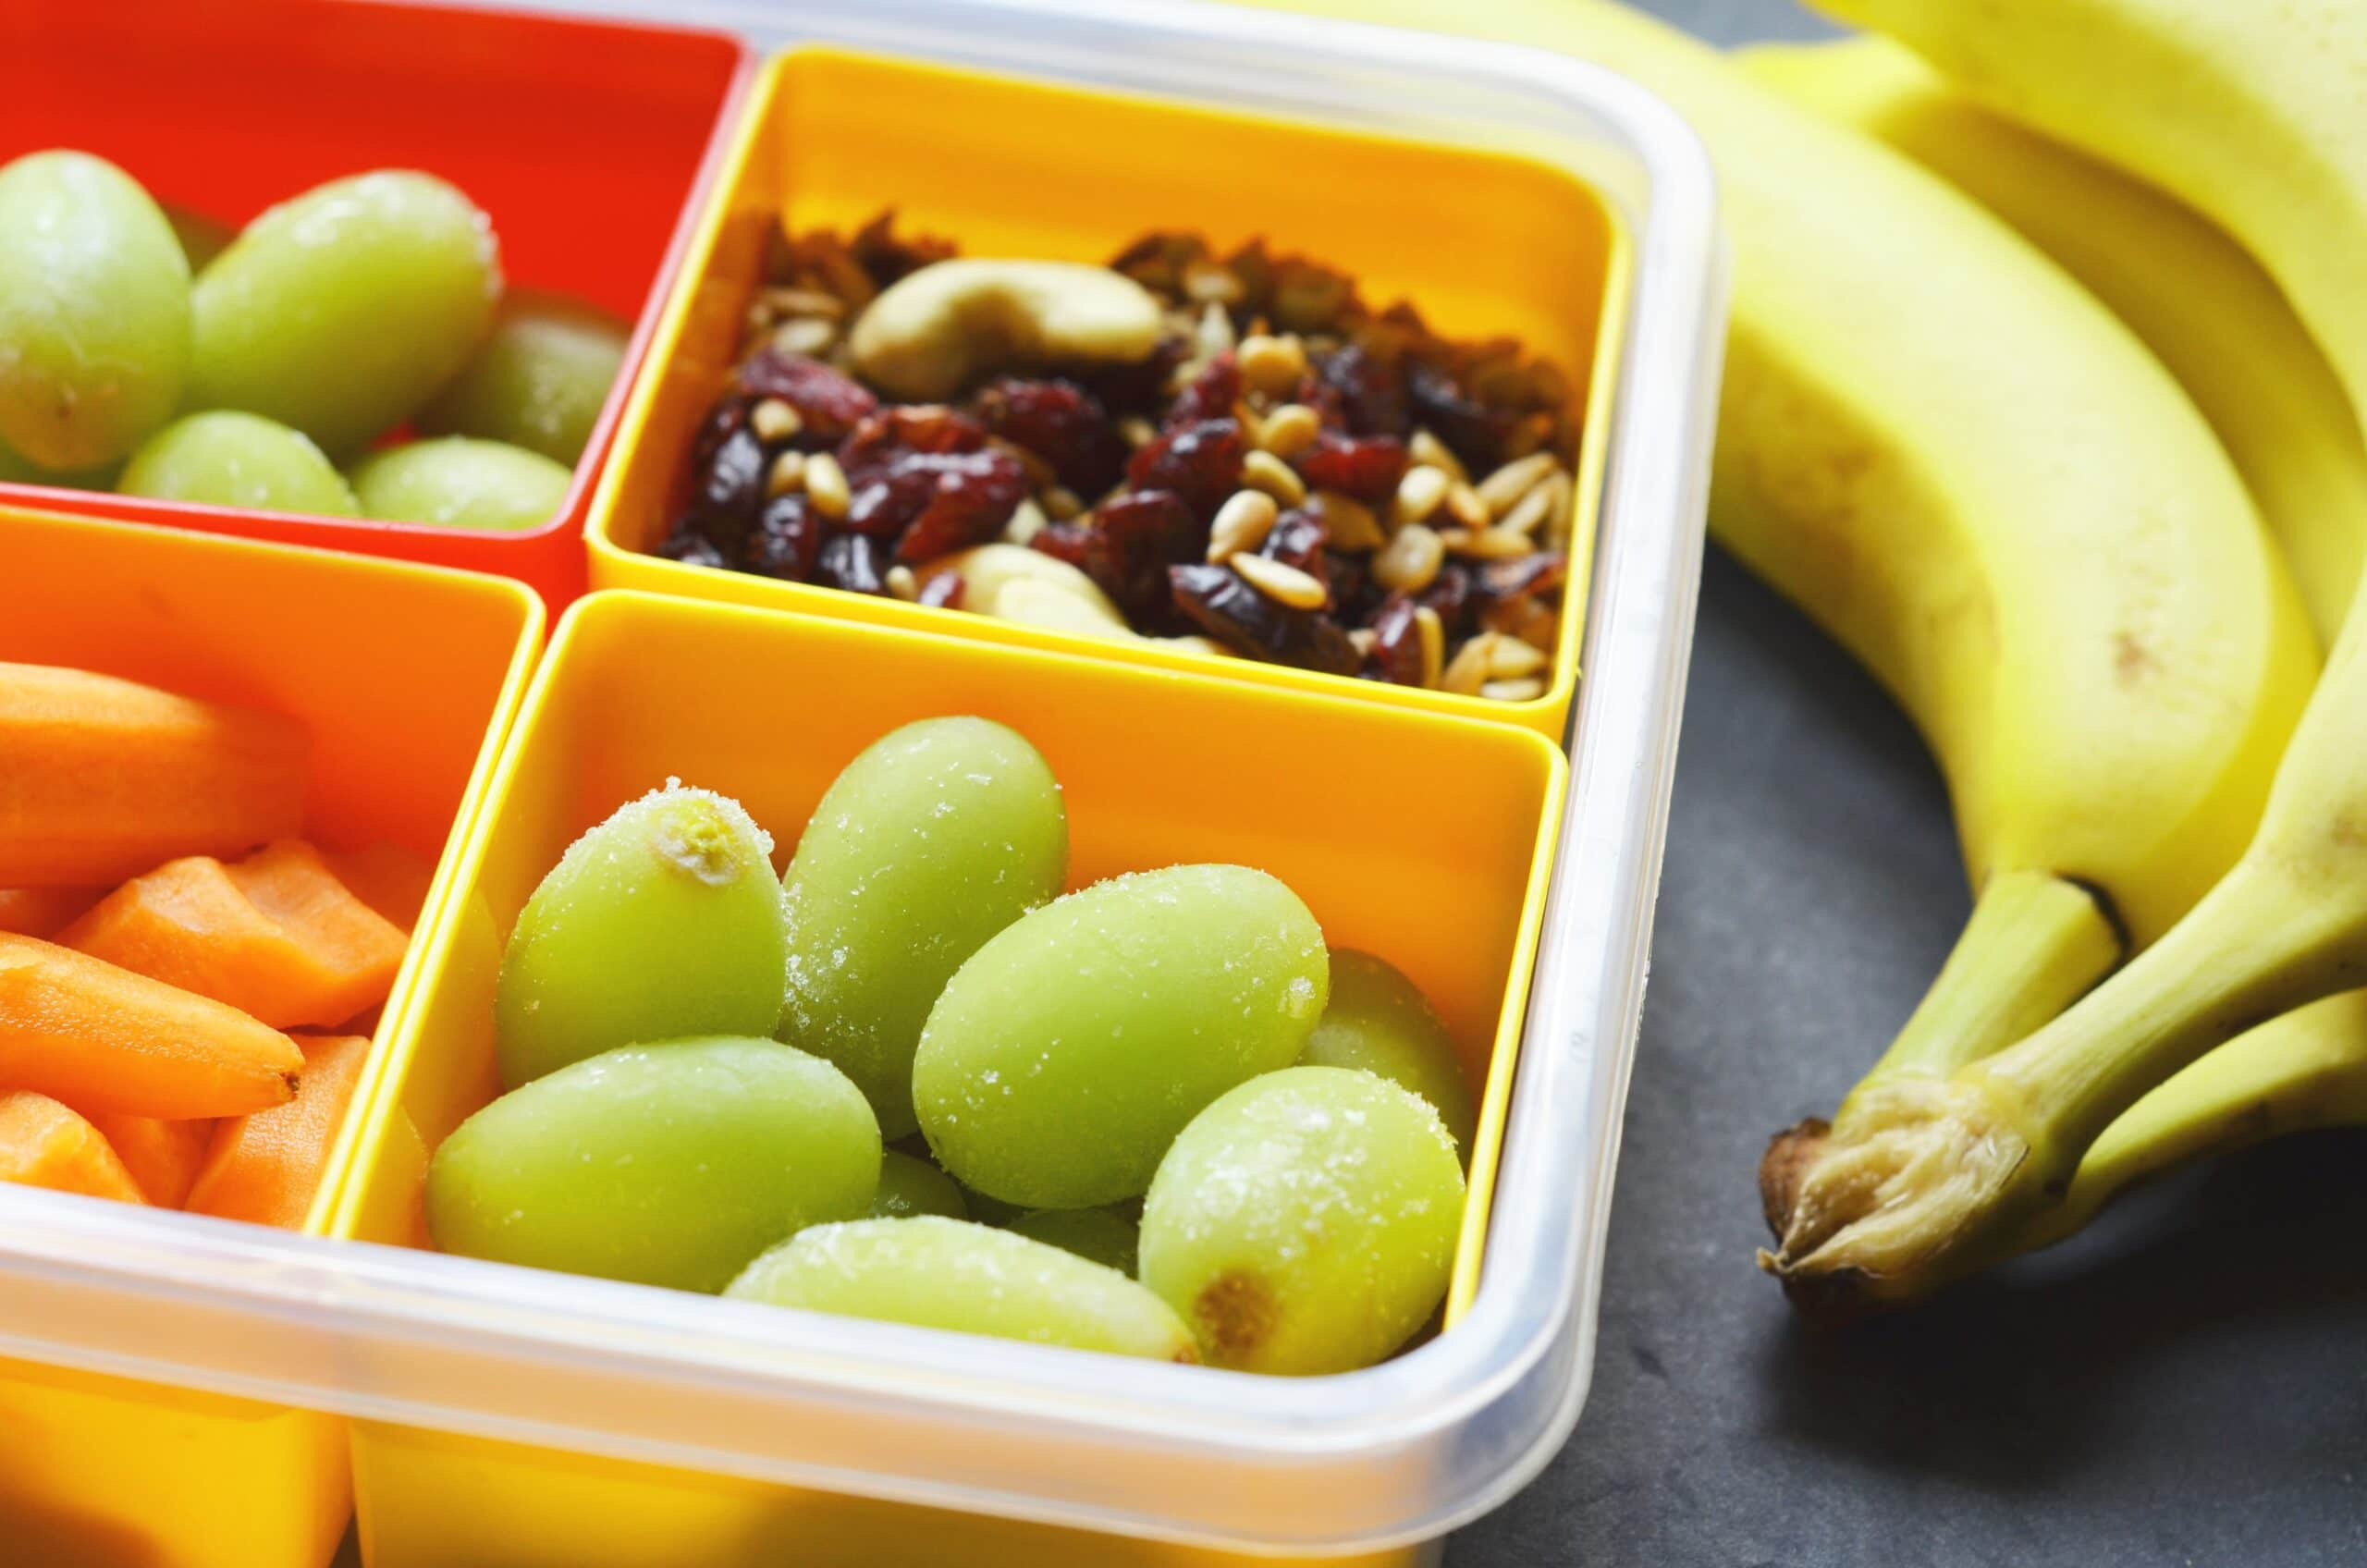 15 Delicious Healthy Snacks for Kids at School